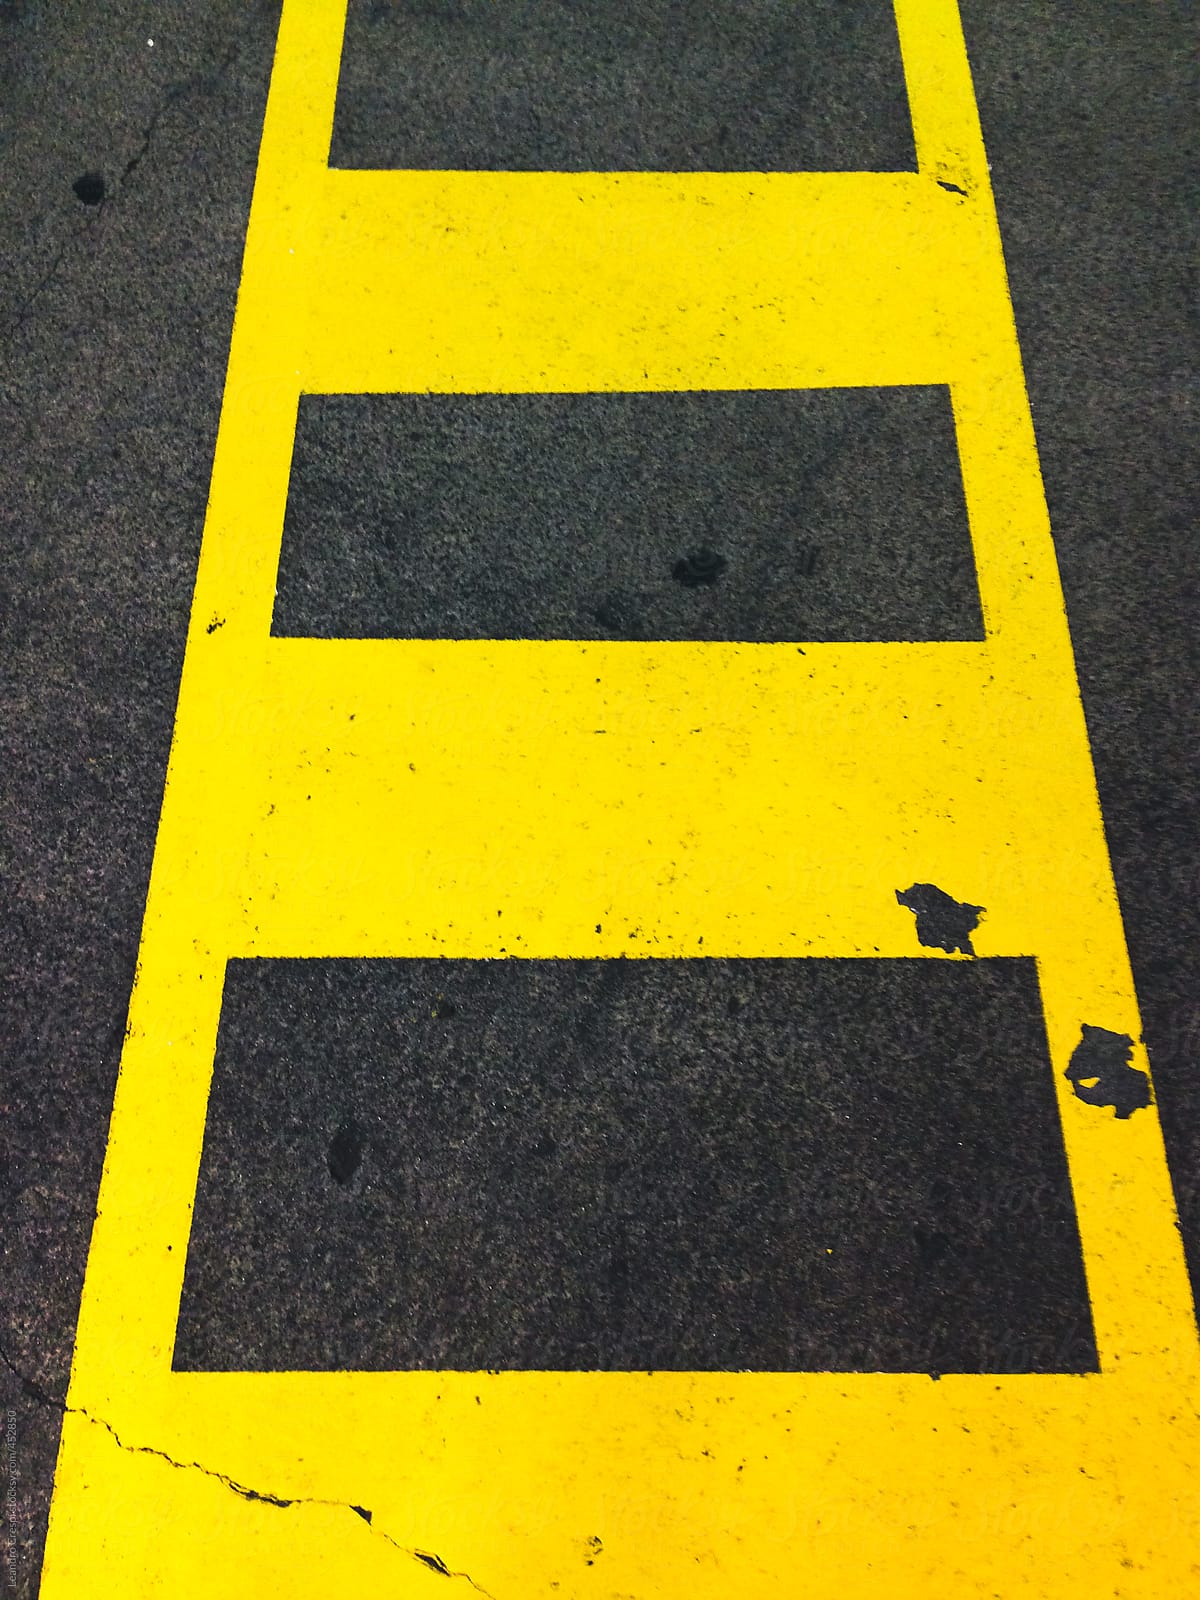 Yellow parking lines painted on the asphalt